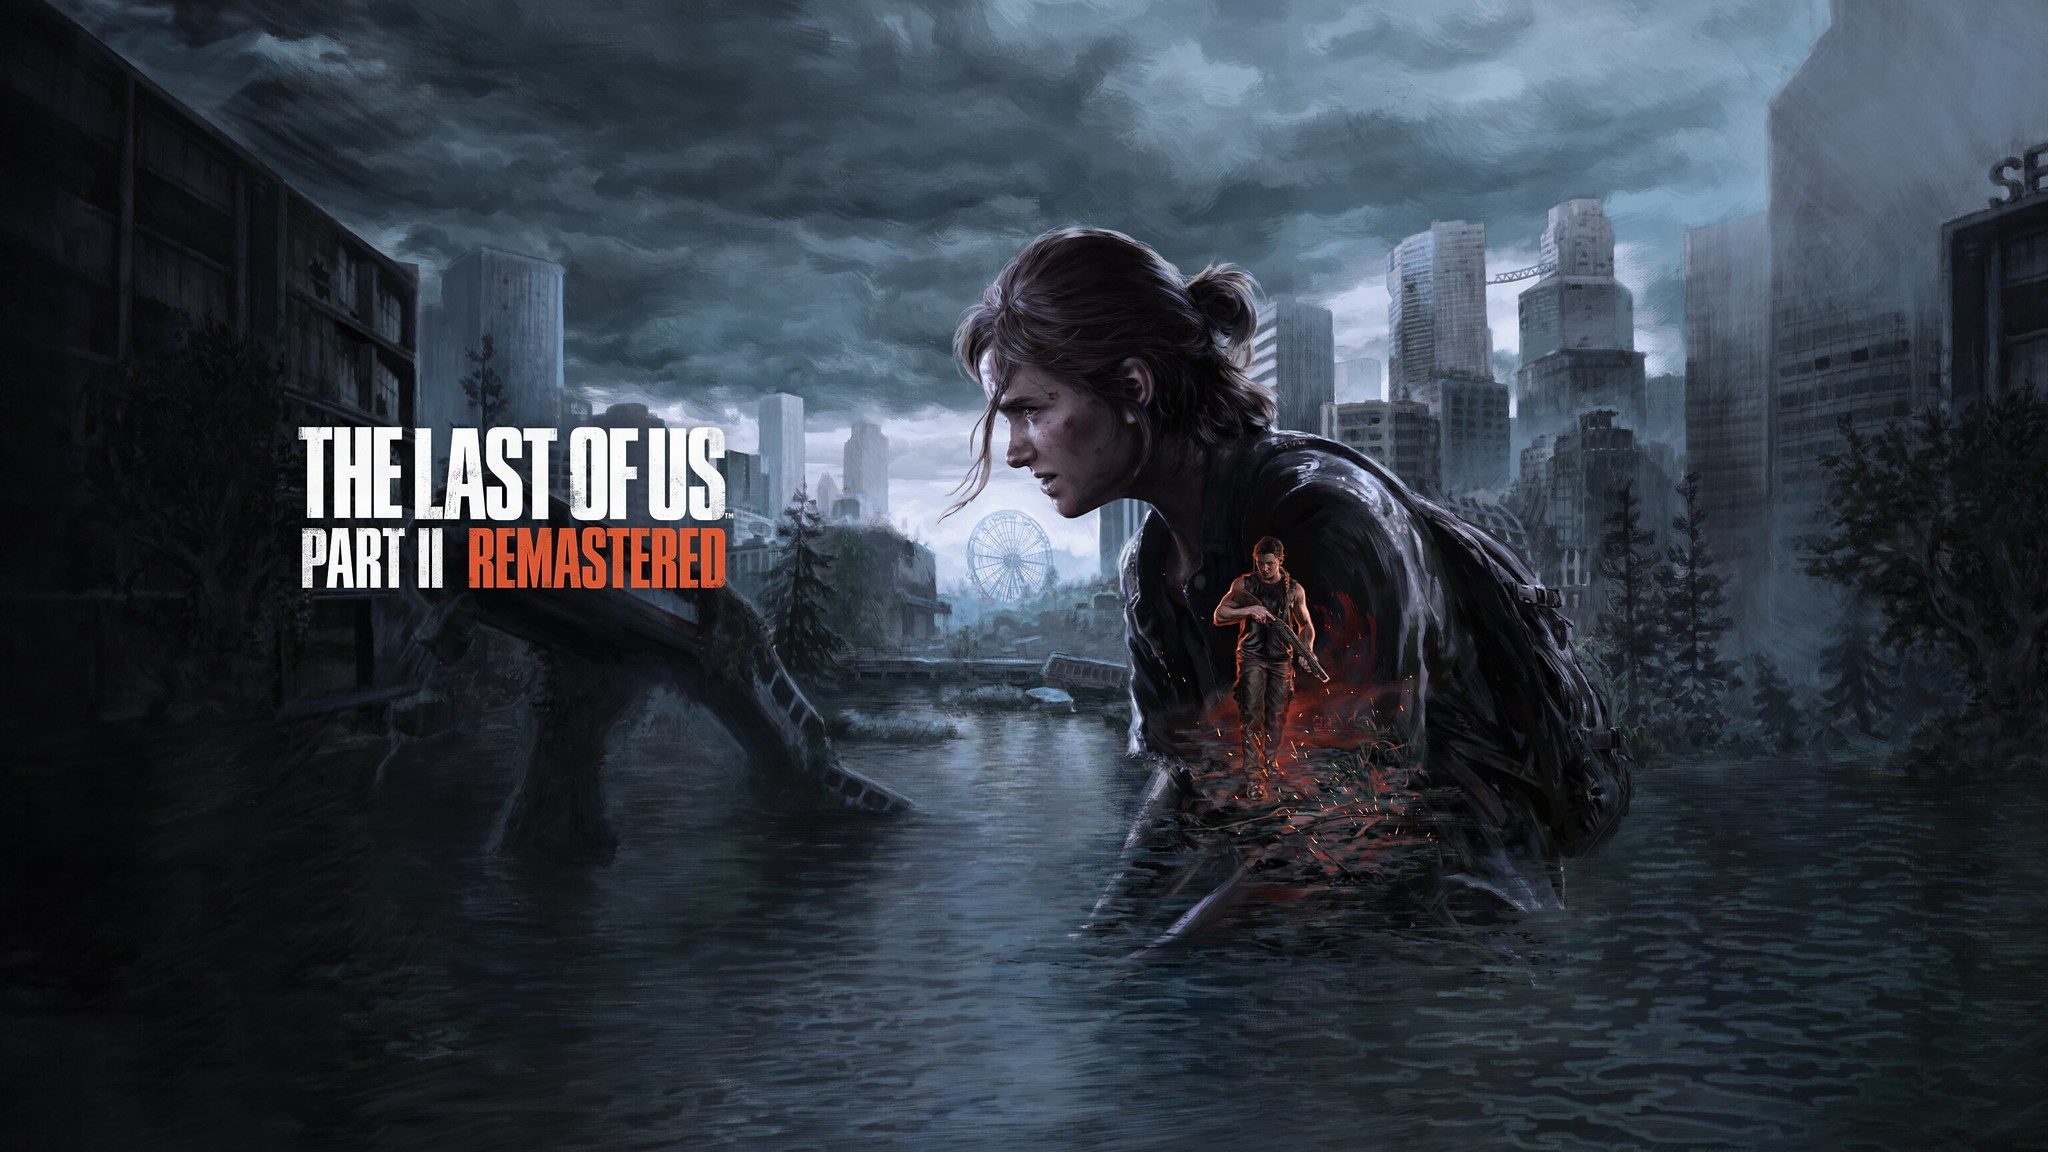 The Last of Us Parte II Remastered. Playstation 5